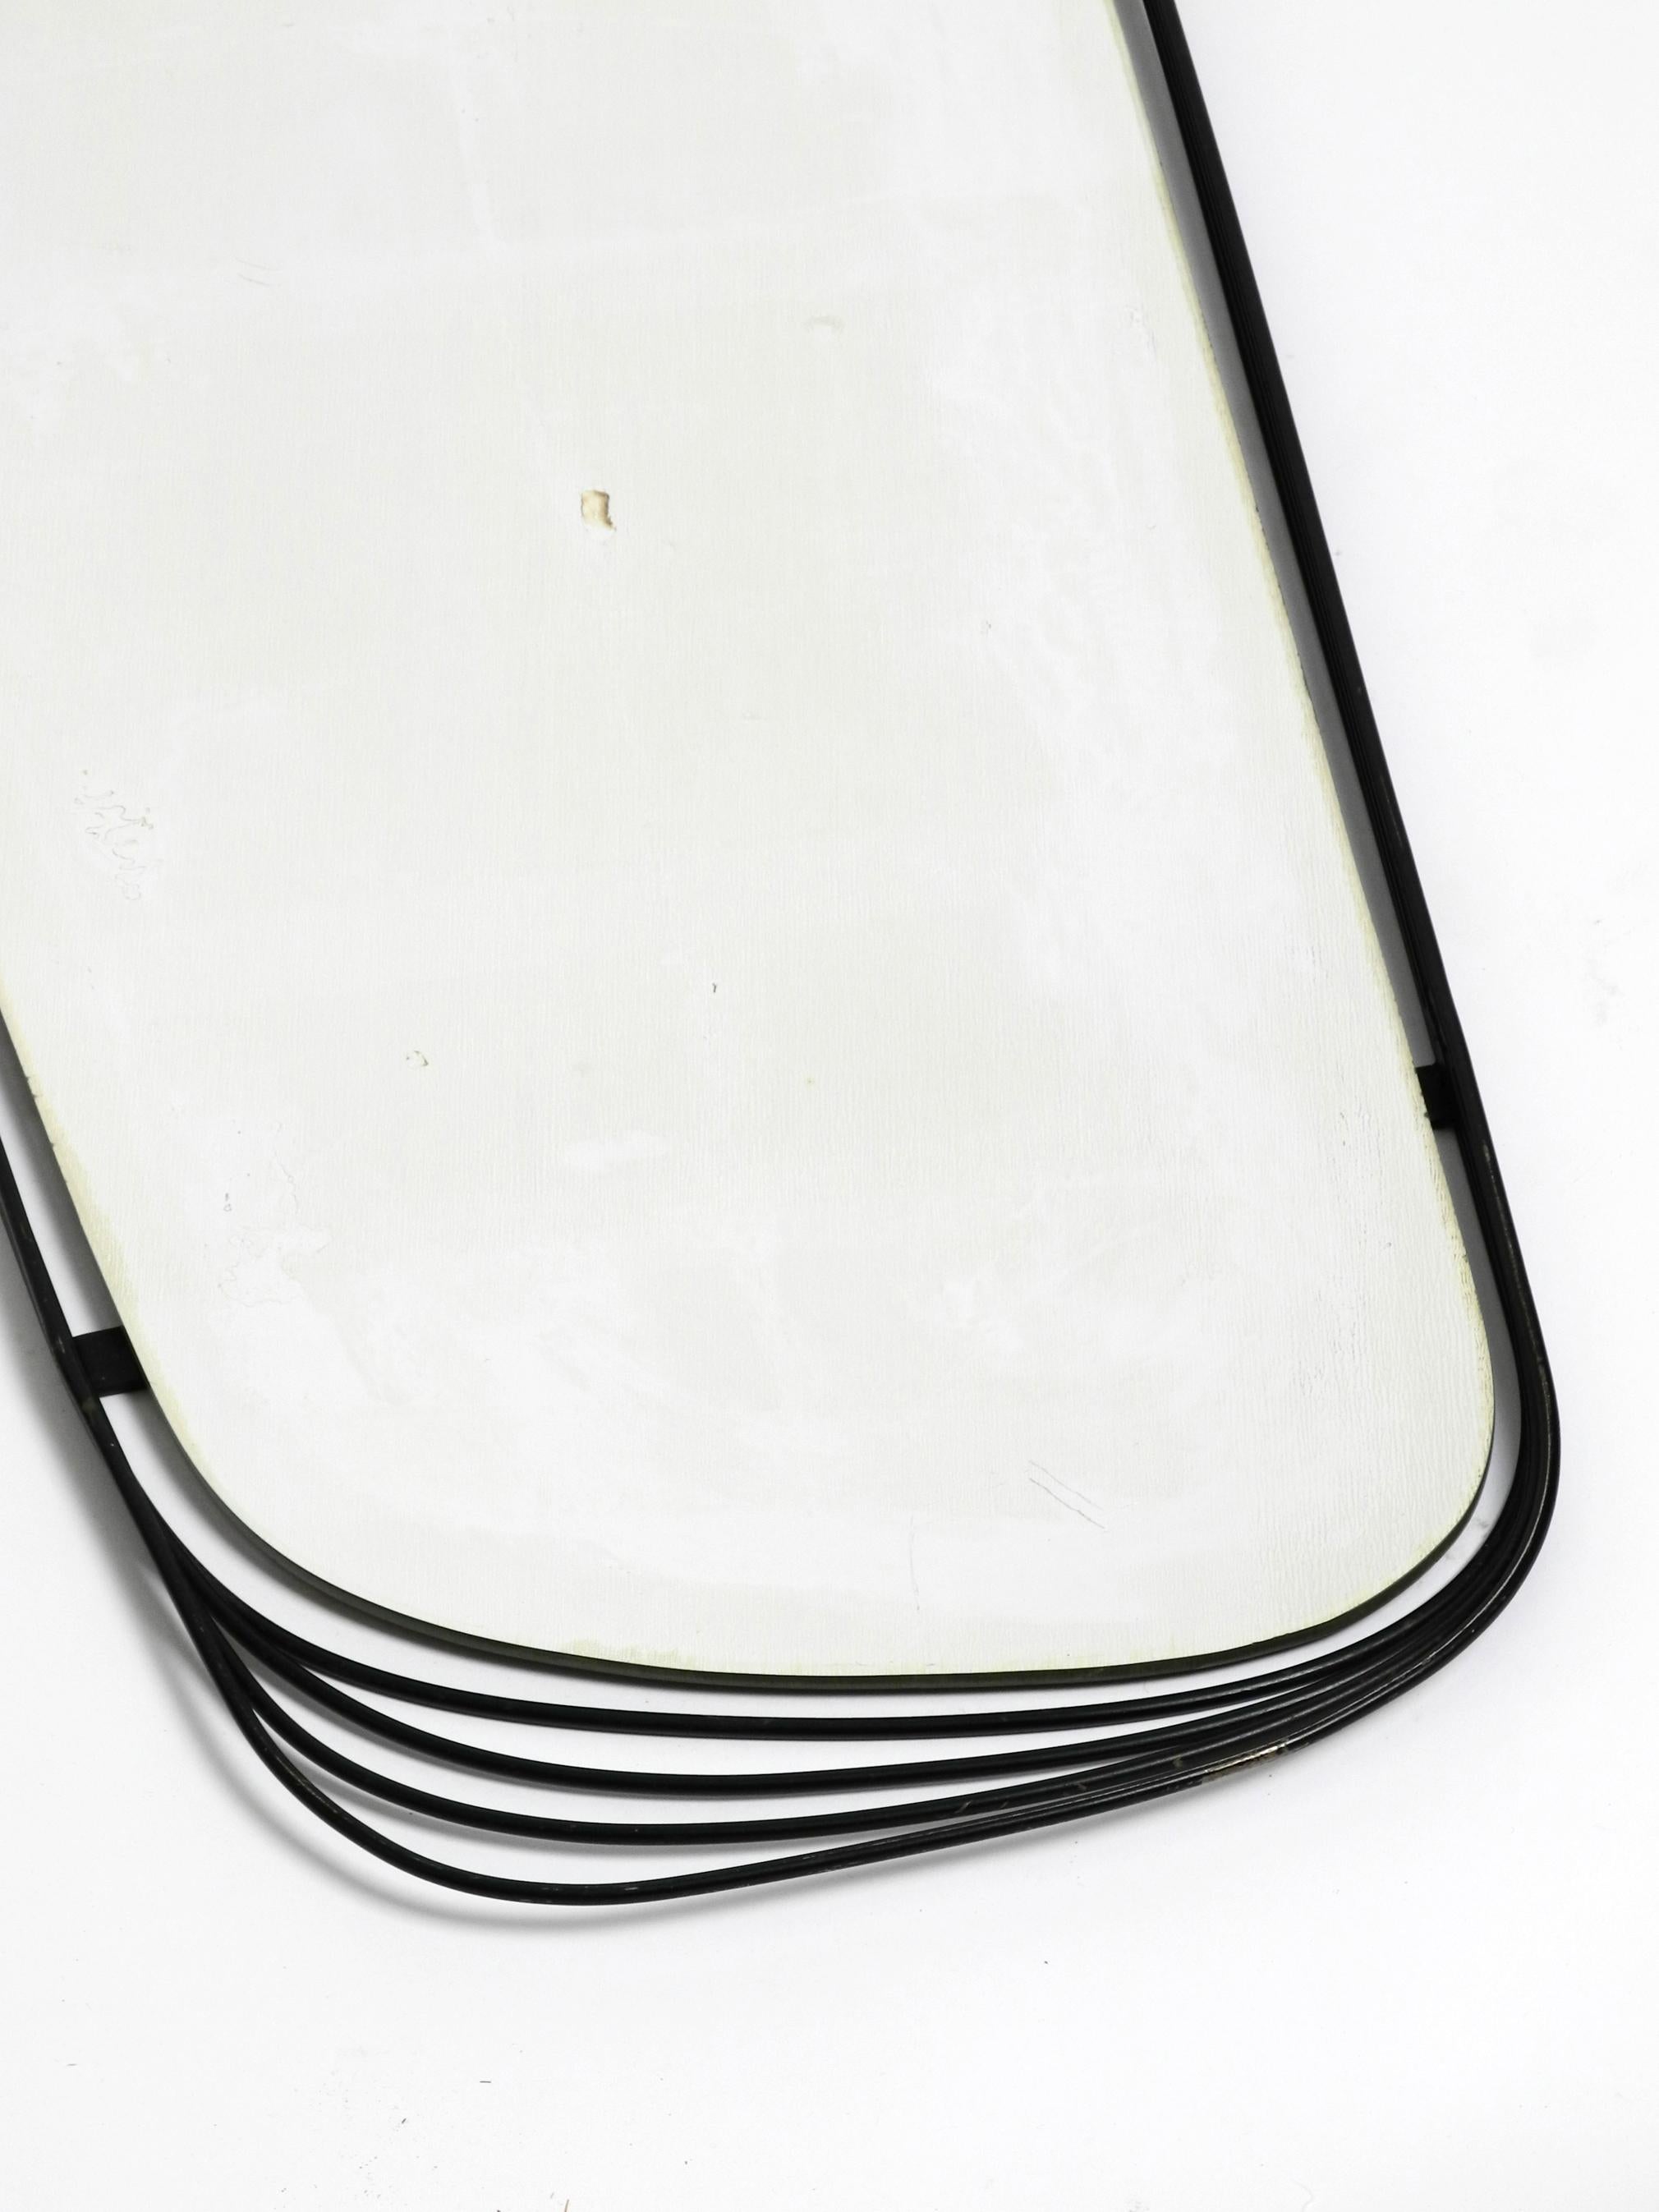 Mid-20th Century Rare Heavy Mid-Century Modern Wall Mirror with a Black Abstract Metal Frame For Sale